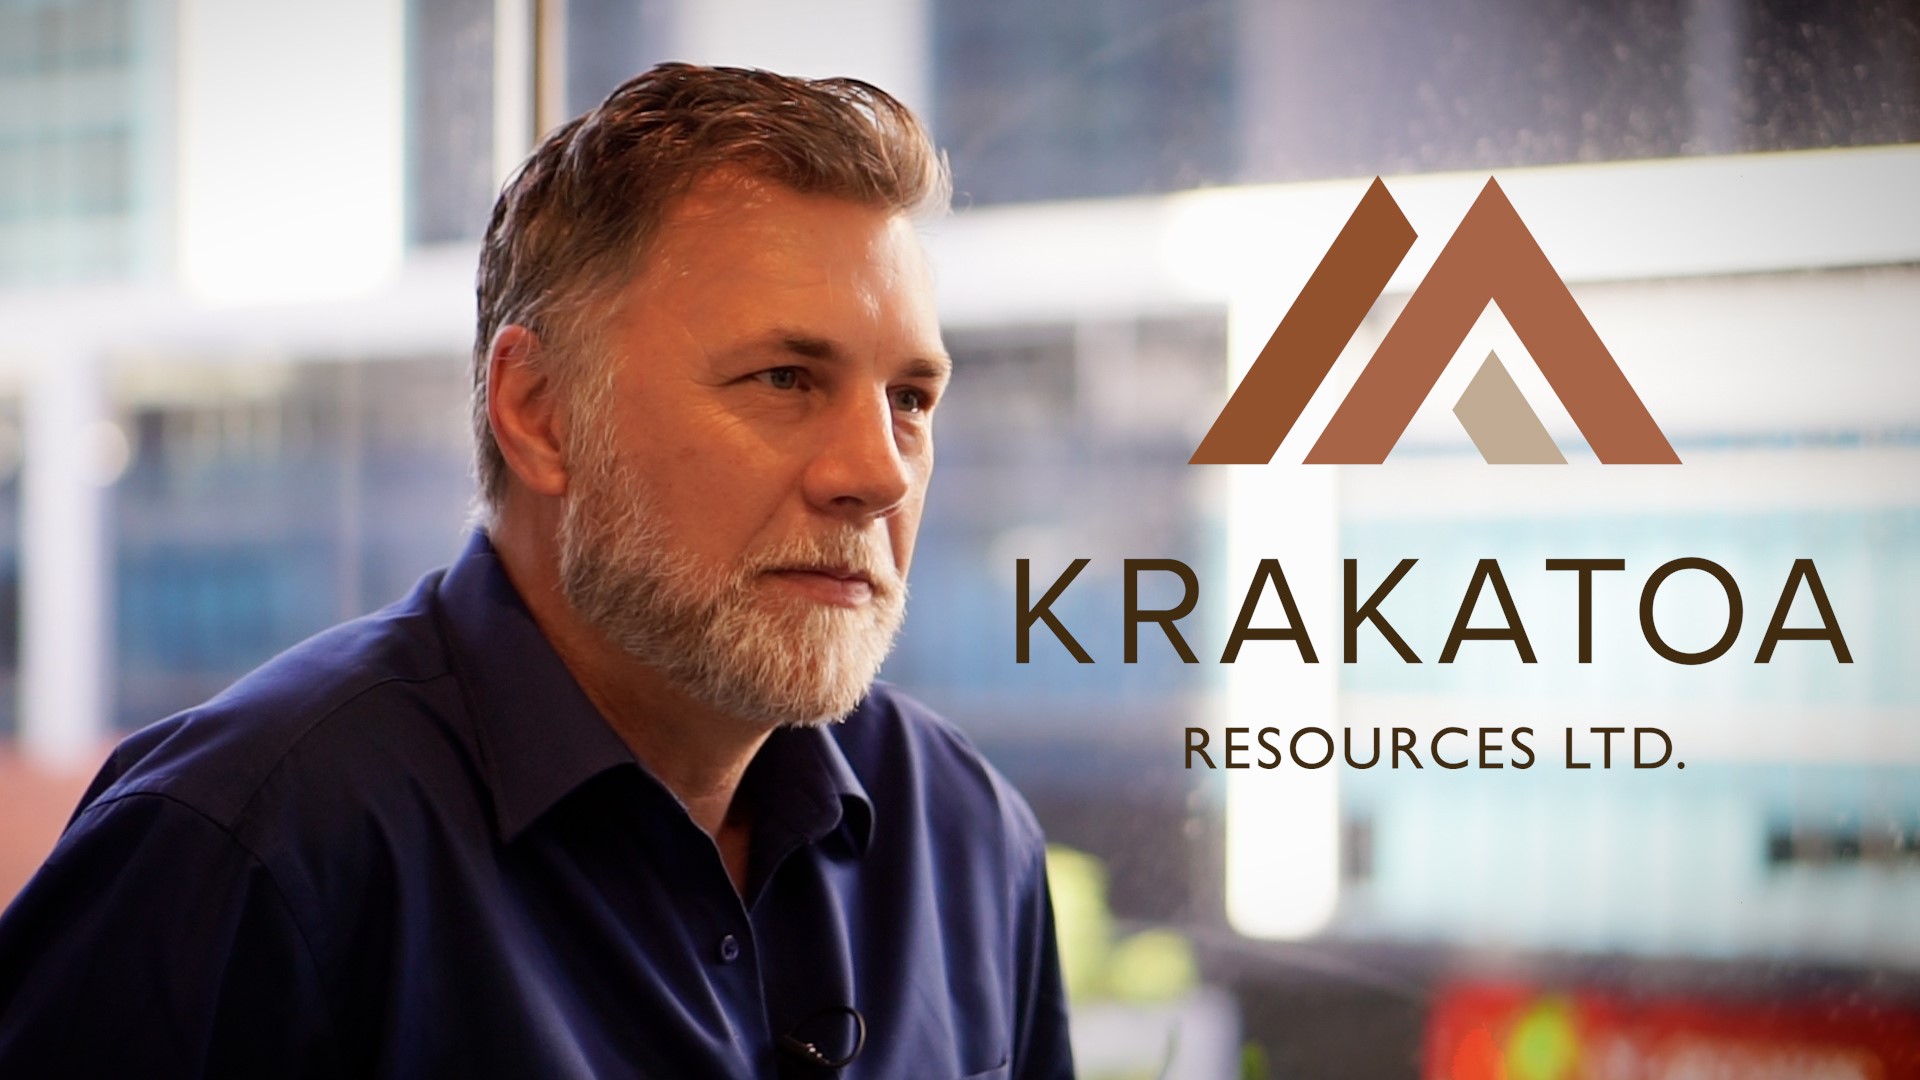 Krakatoa Resources (ASX:KTA) CEO Company Overview and Exploration Update